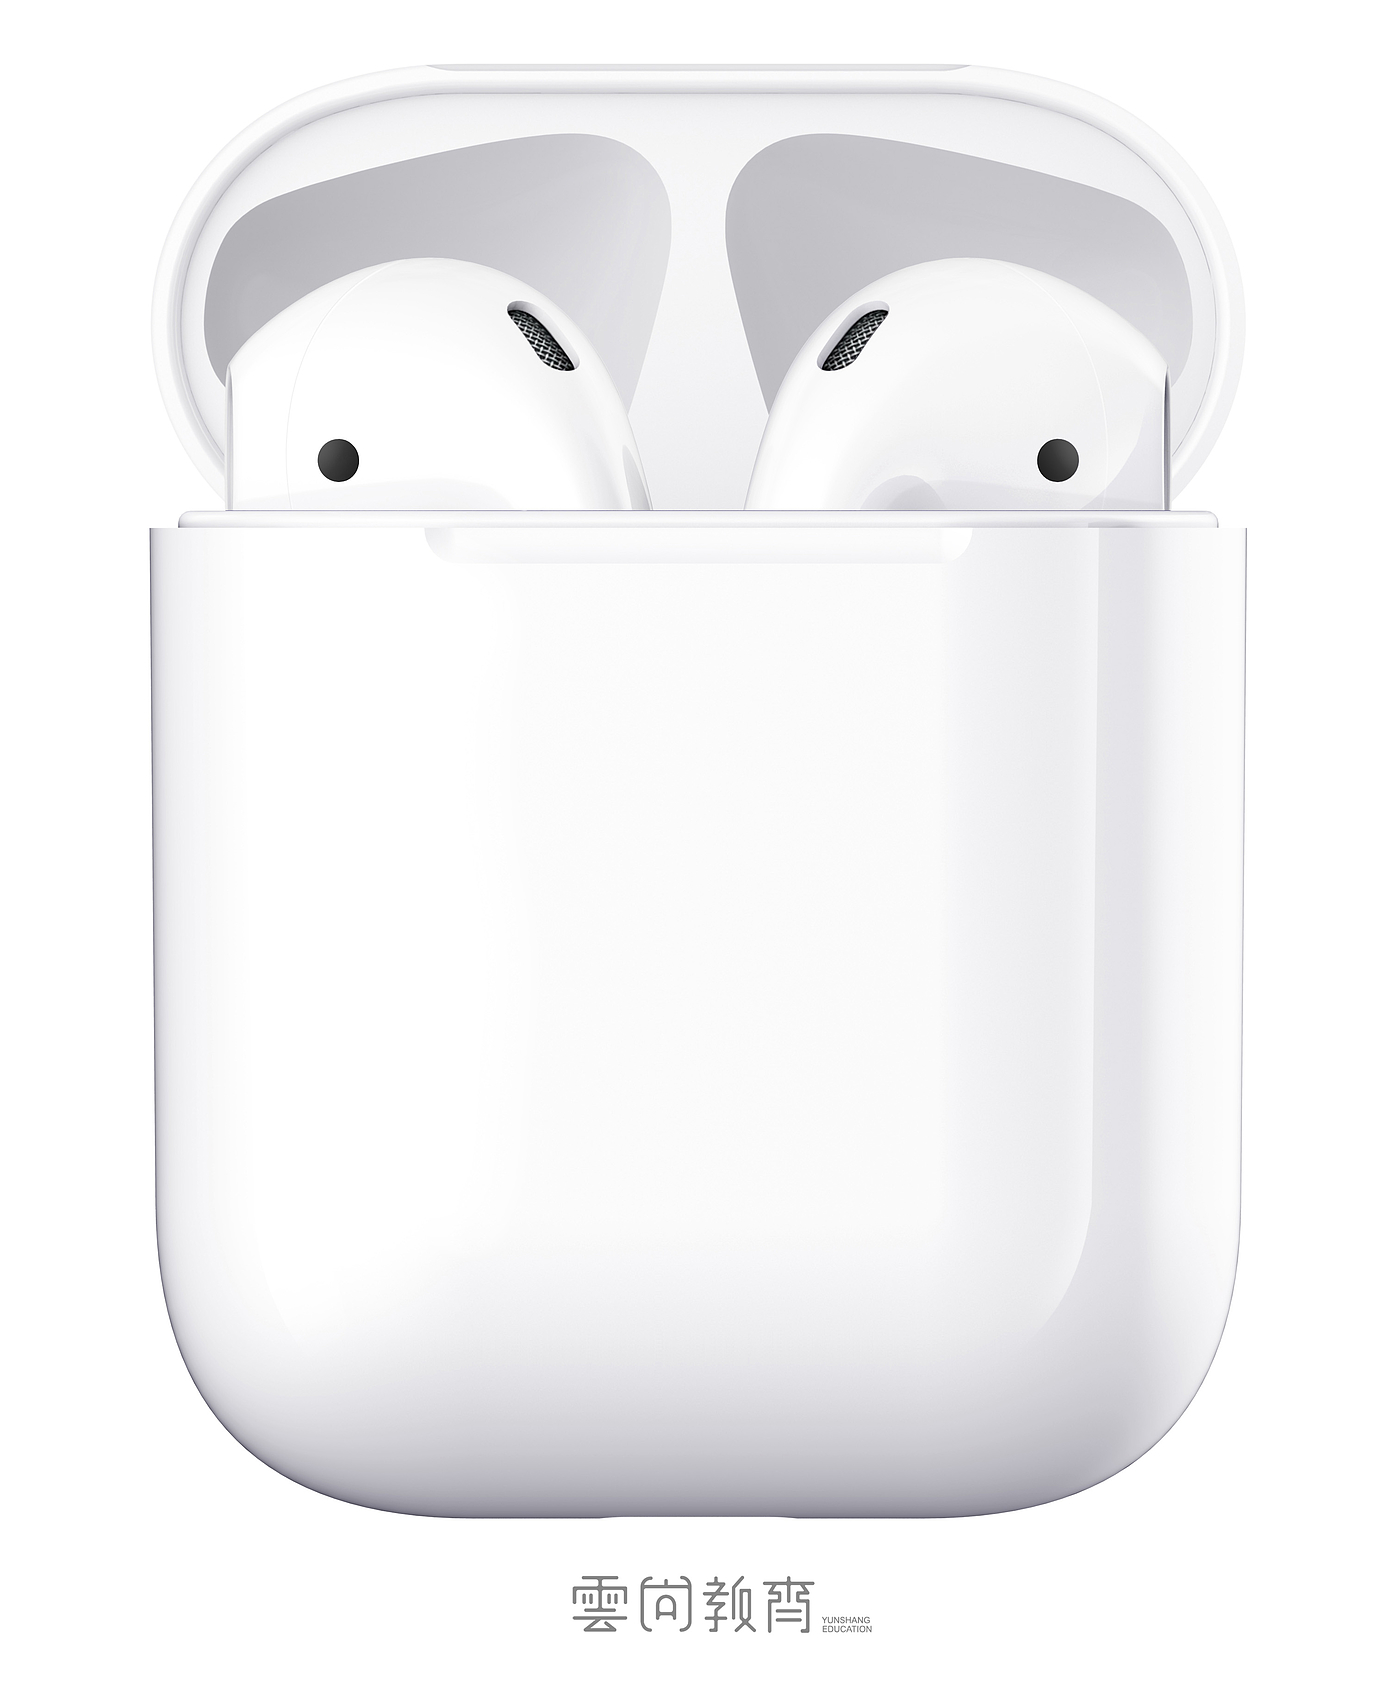 airpods，